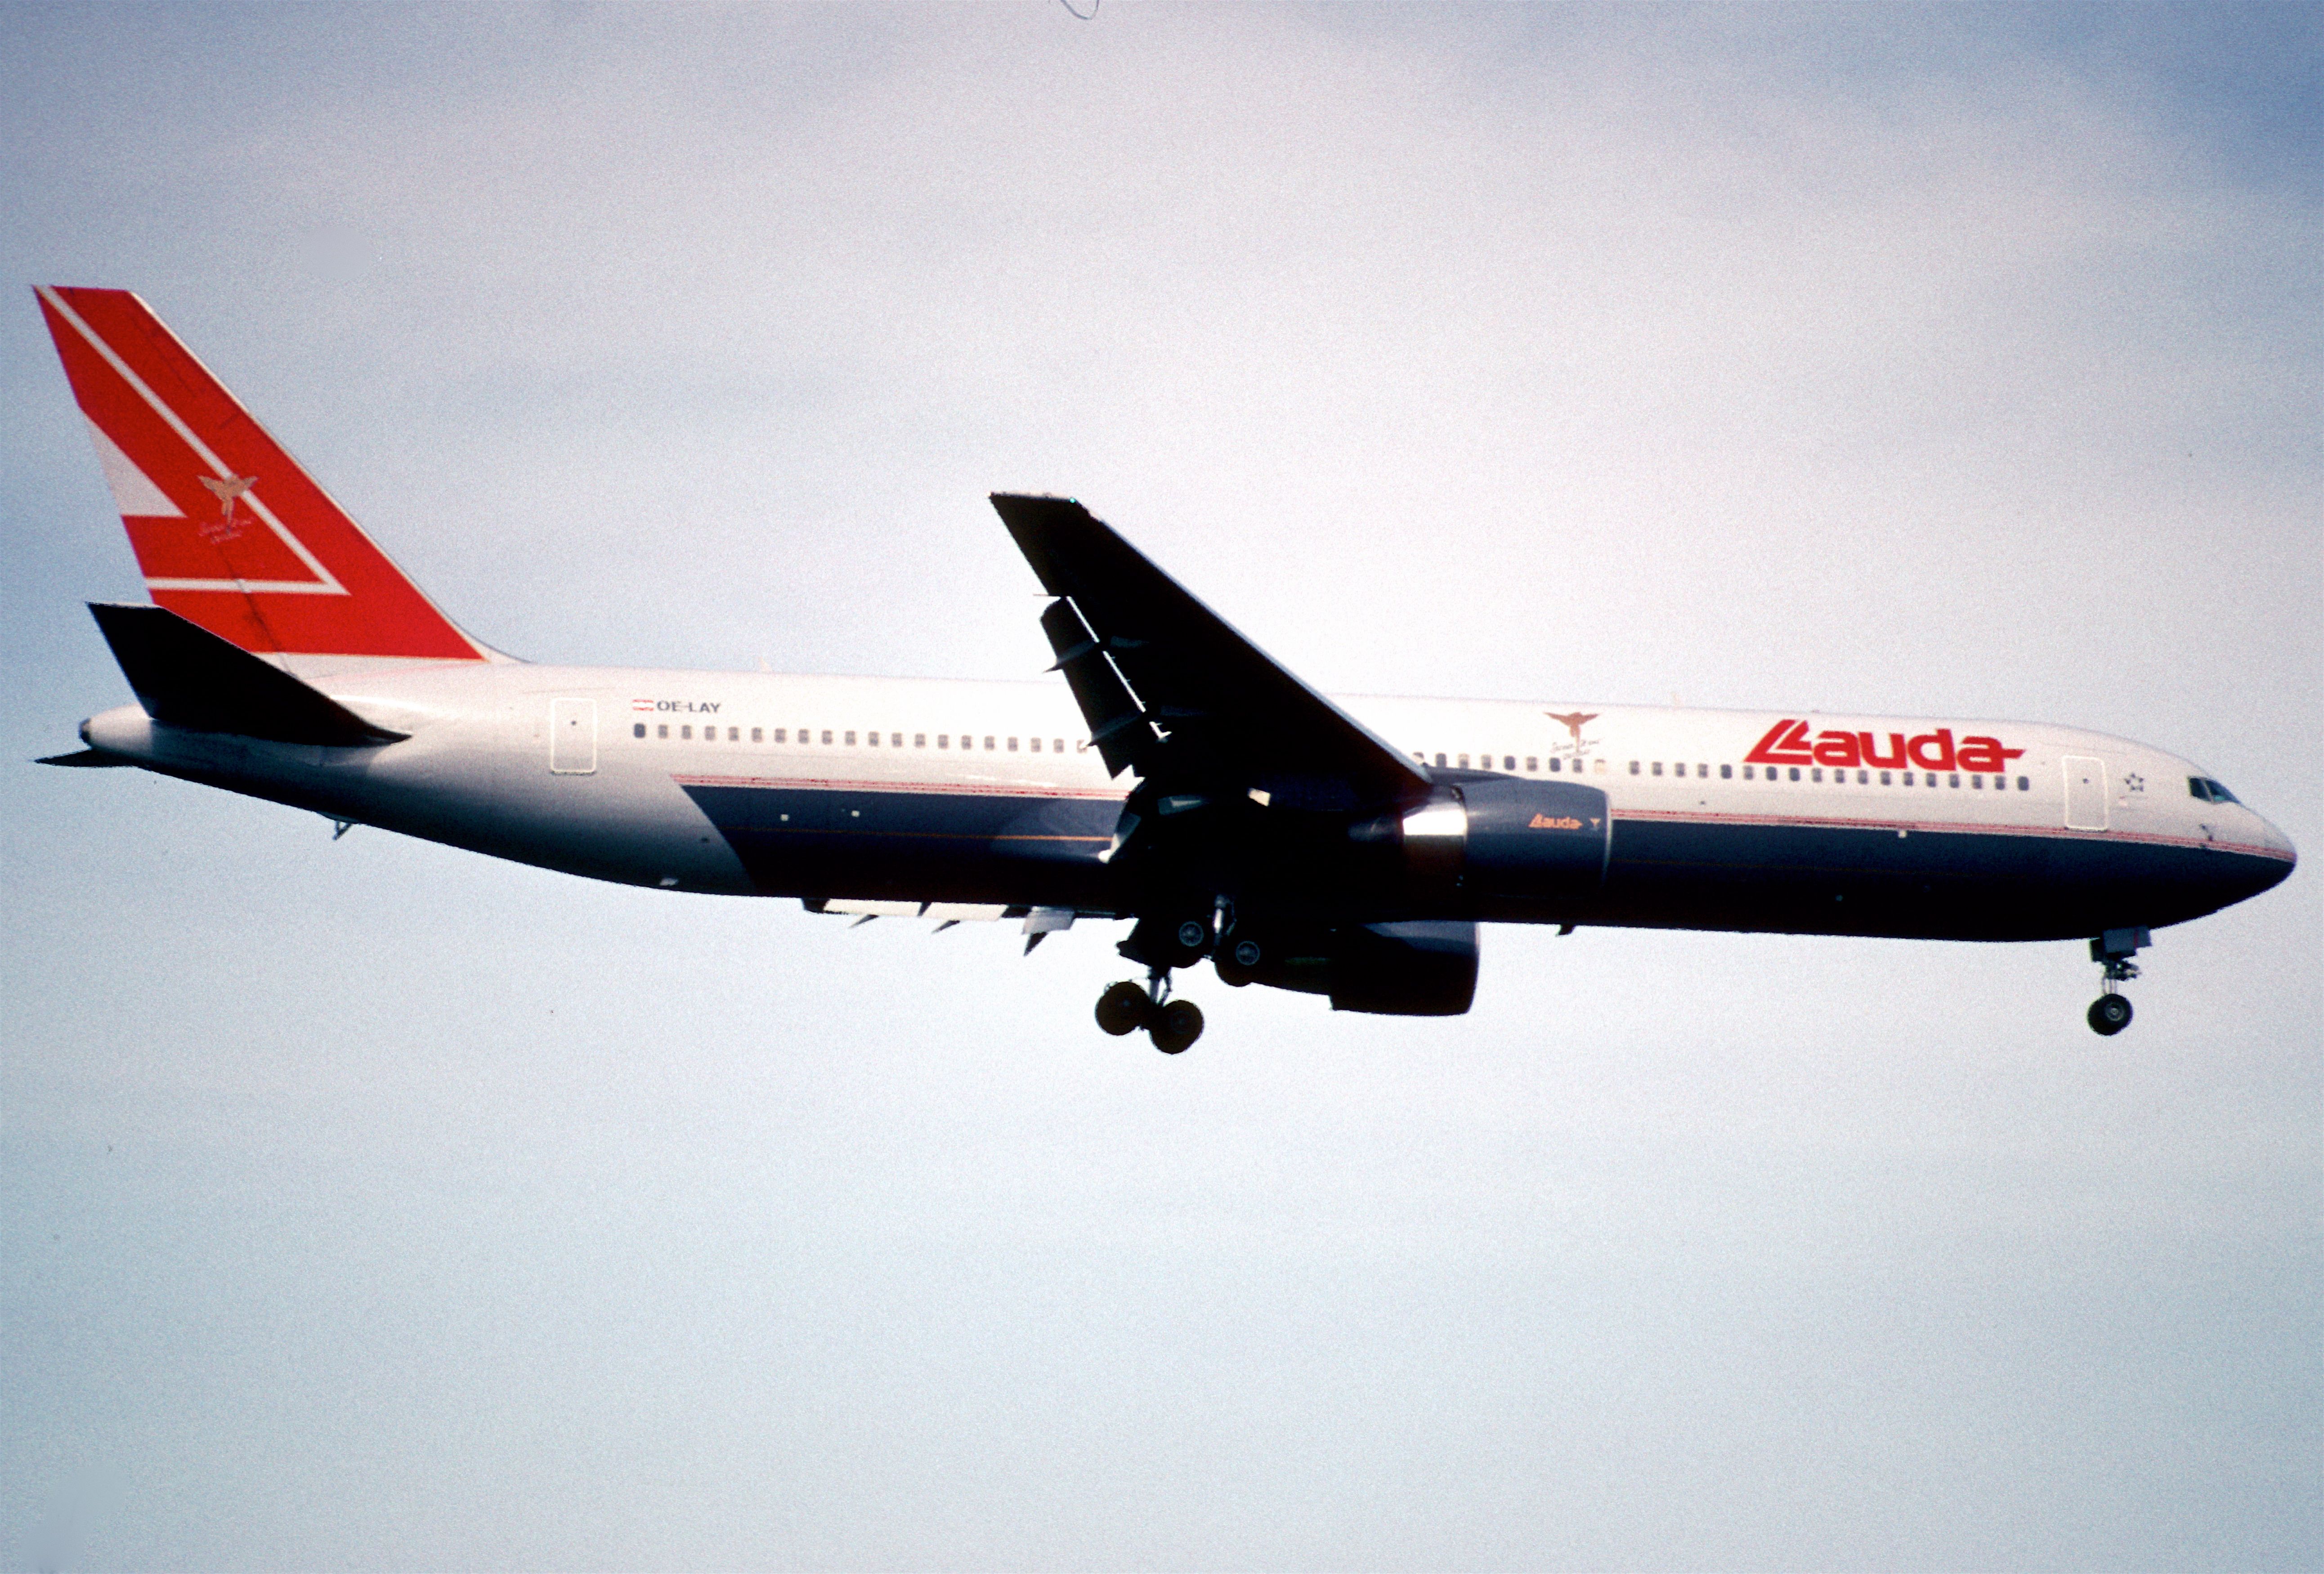 A Lauda Air Boeing 767 Flying in the sky.